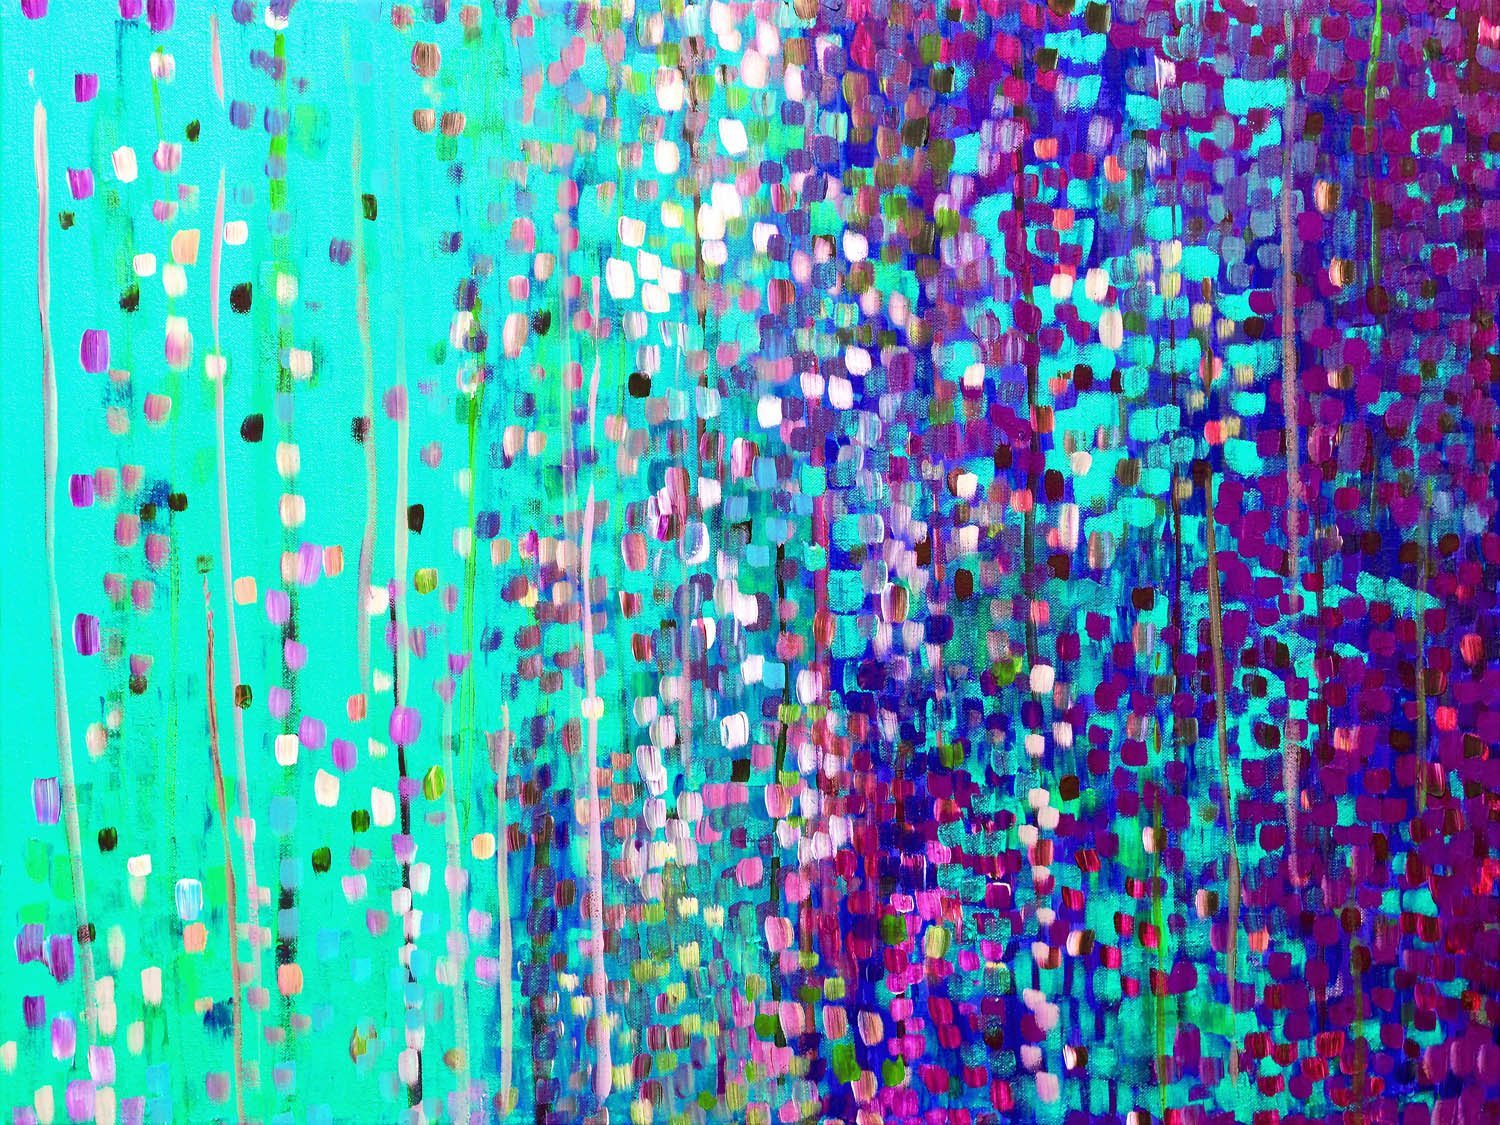 Turquoise & Purple Abstract Art Print - Louise Mead